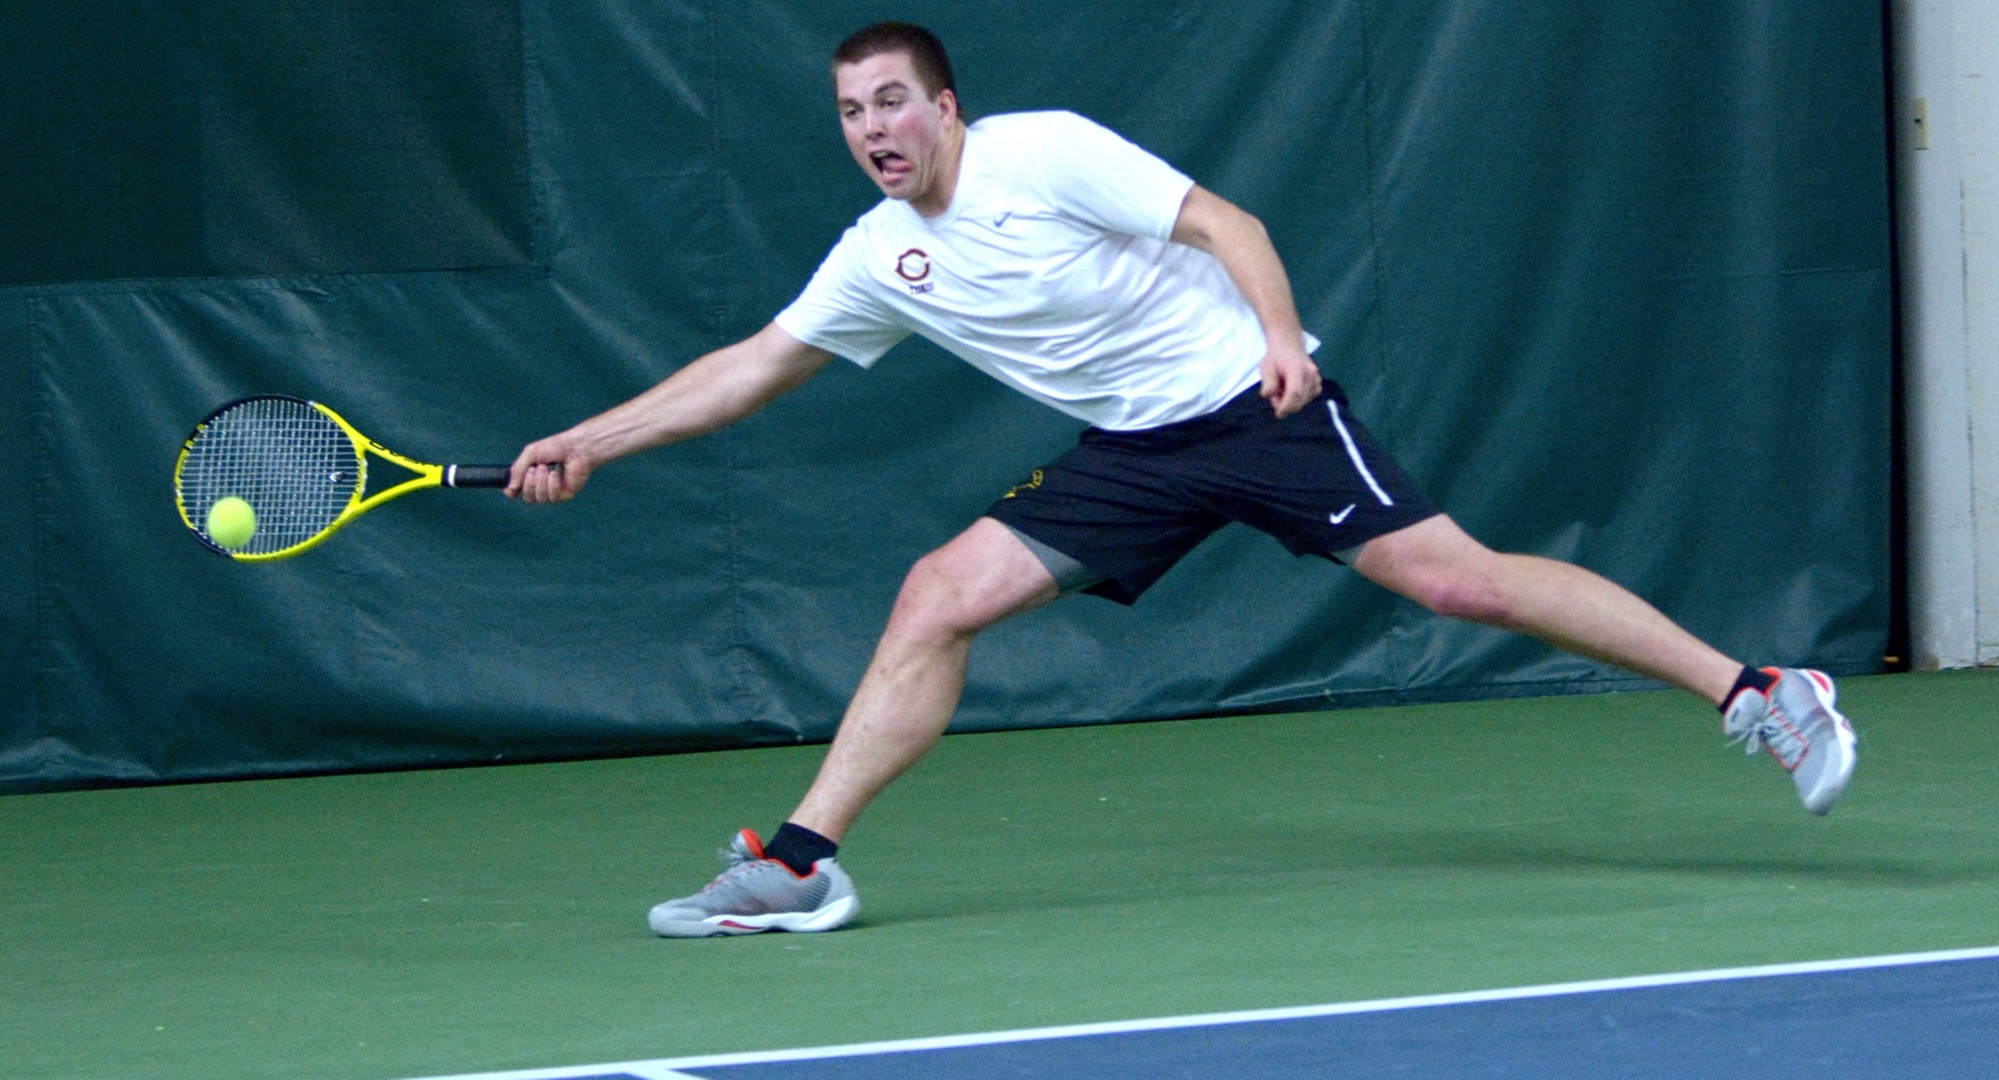 Junior Isaac Toivonen won both his singles and doubles matches in the Cobbers' match against Carleton.